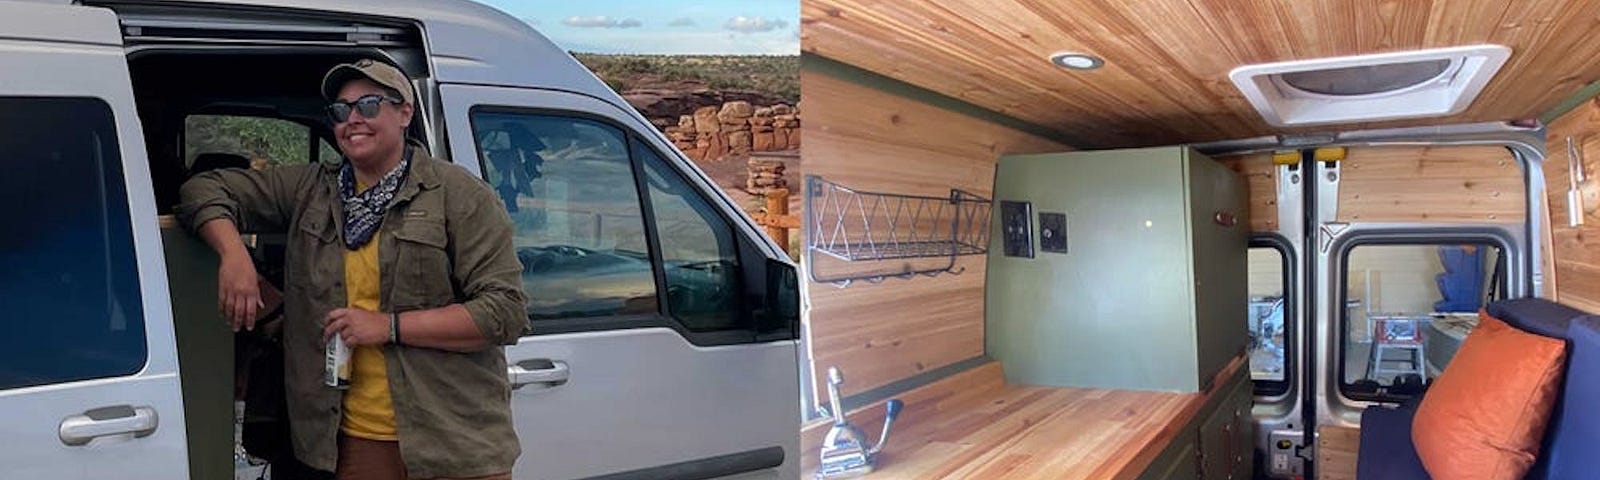 The owner of the renovated van standing next to it (left) and inside the renovated van (right).